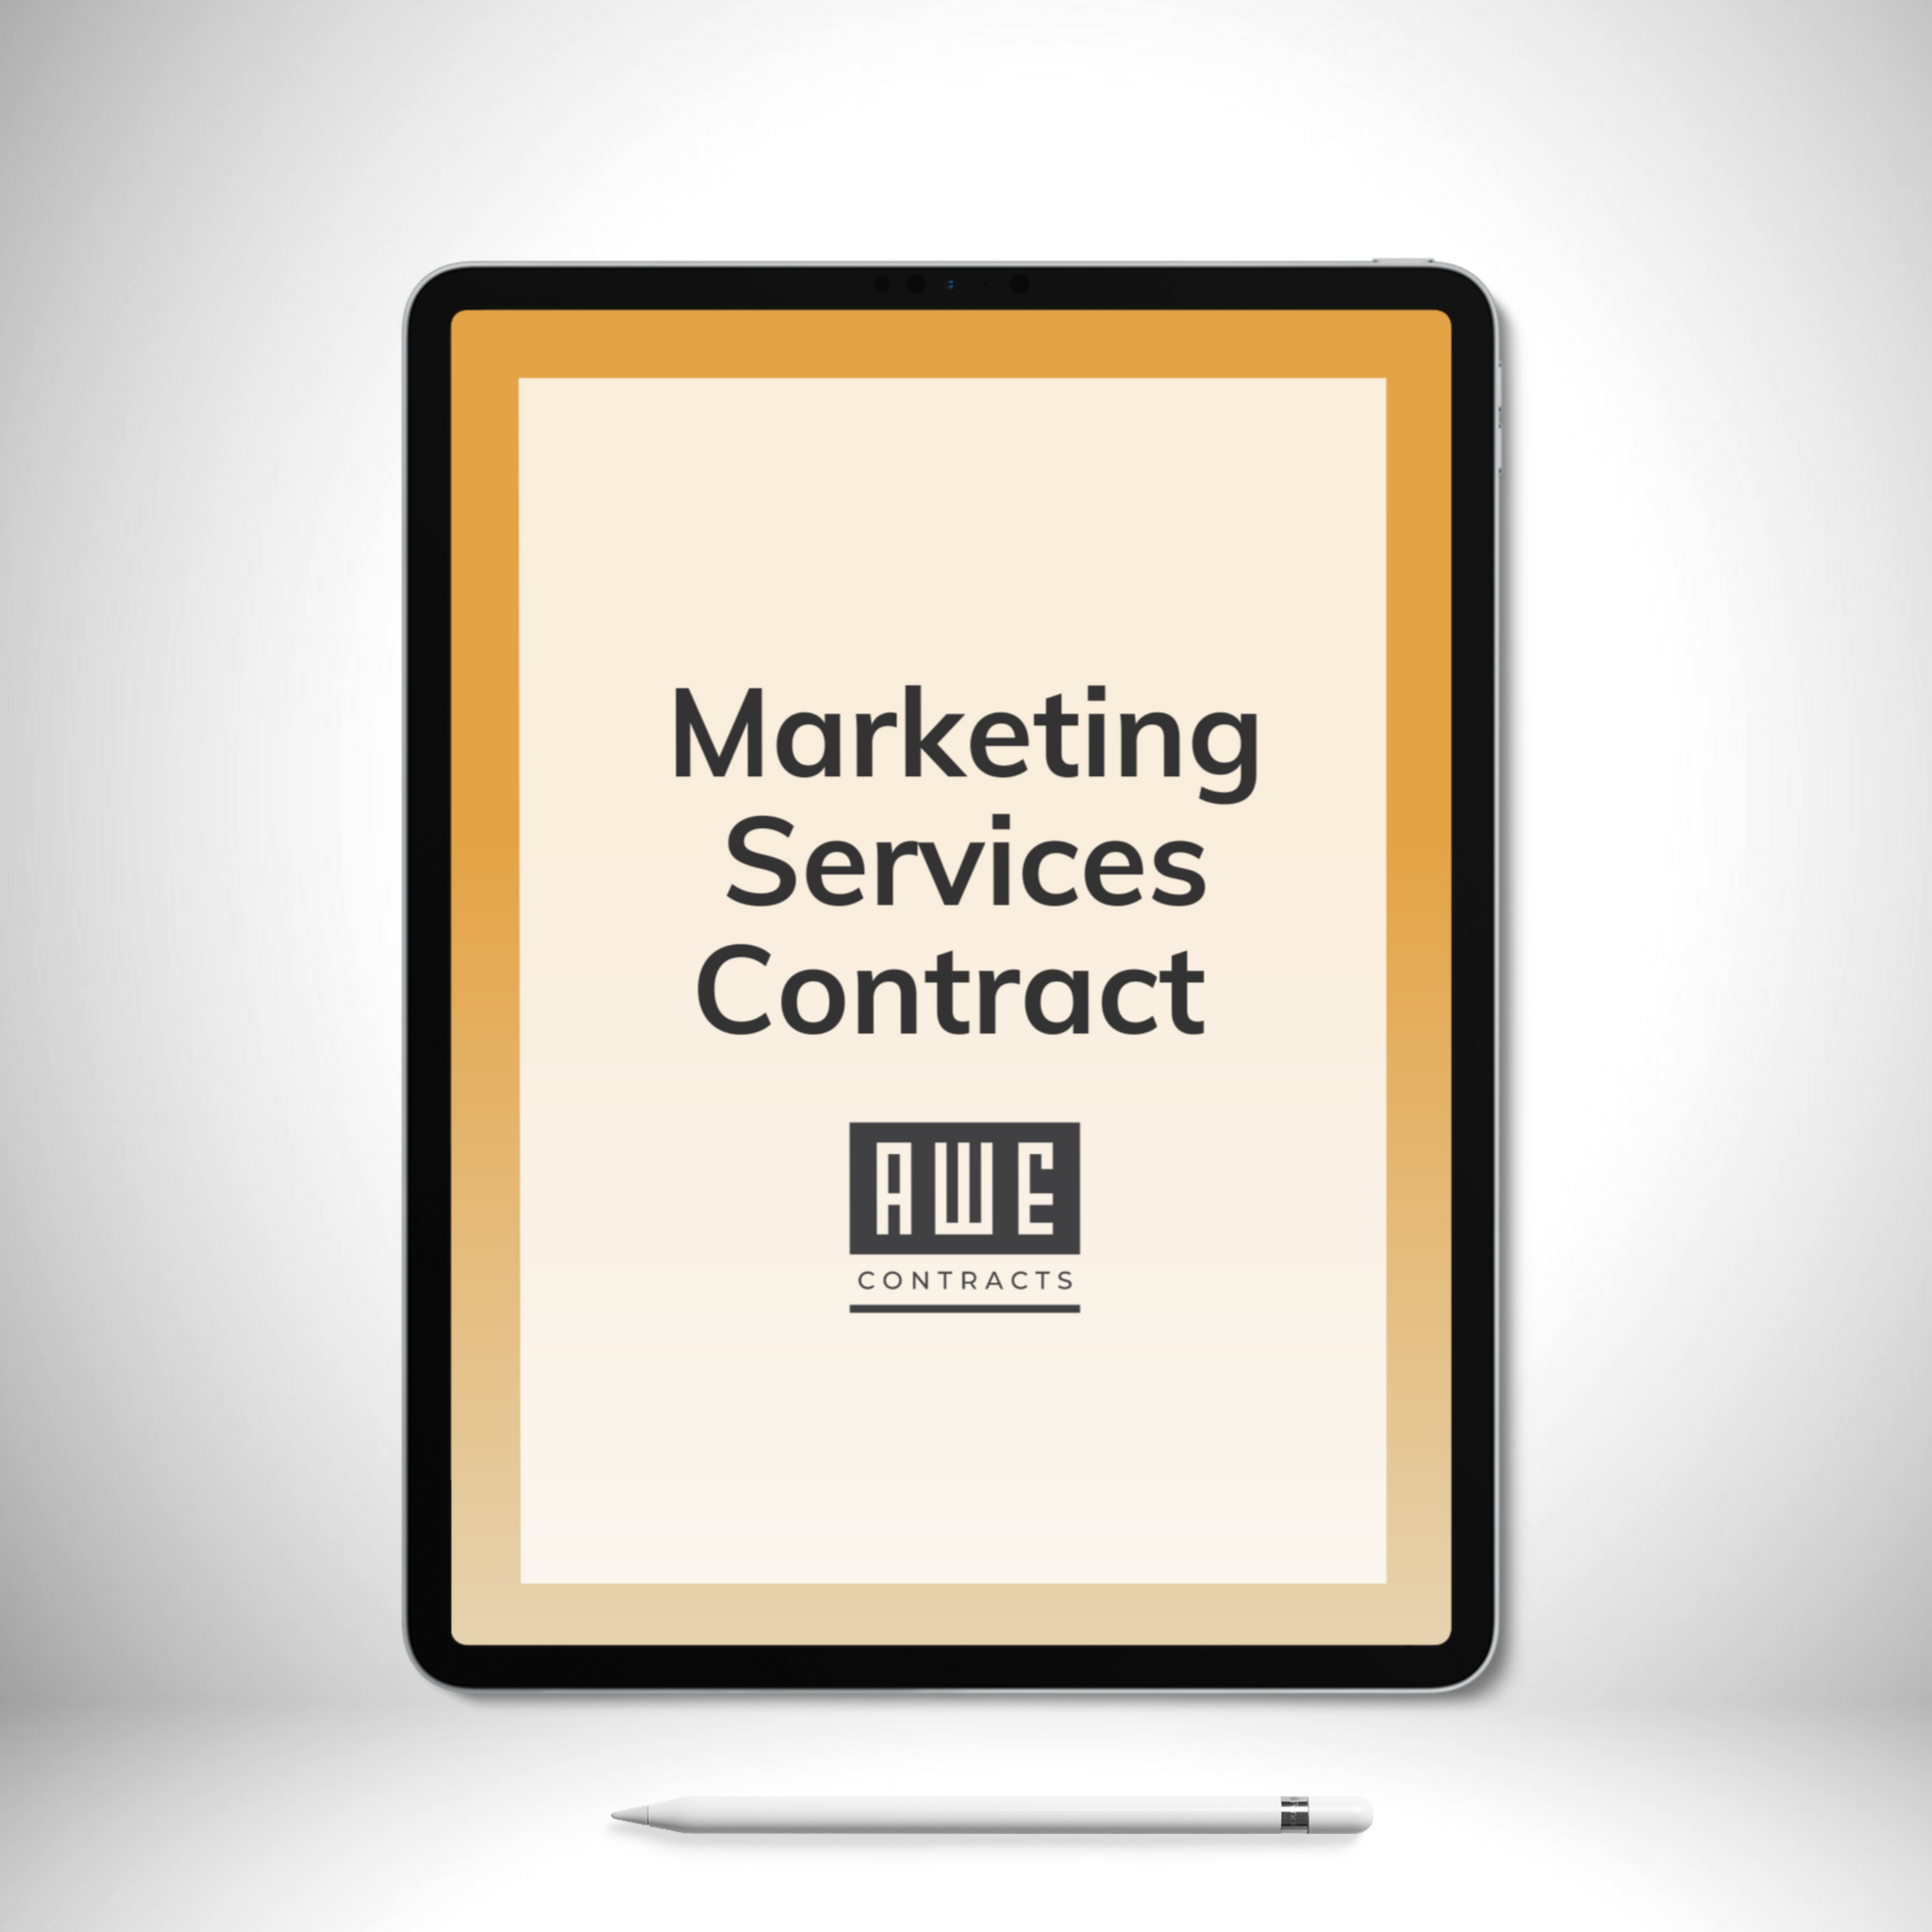 Marketing Services Contract